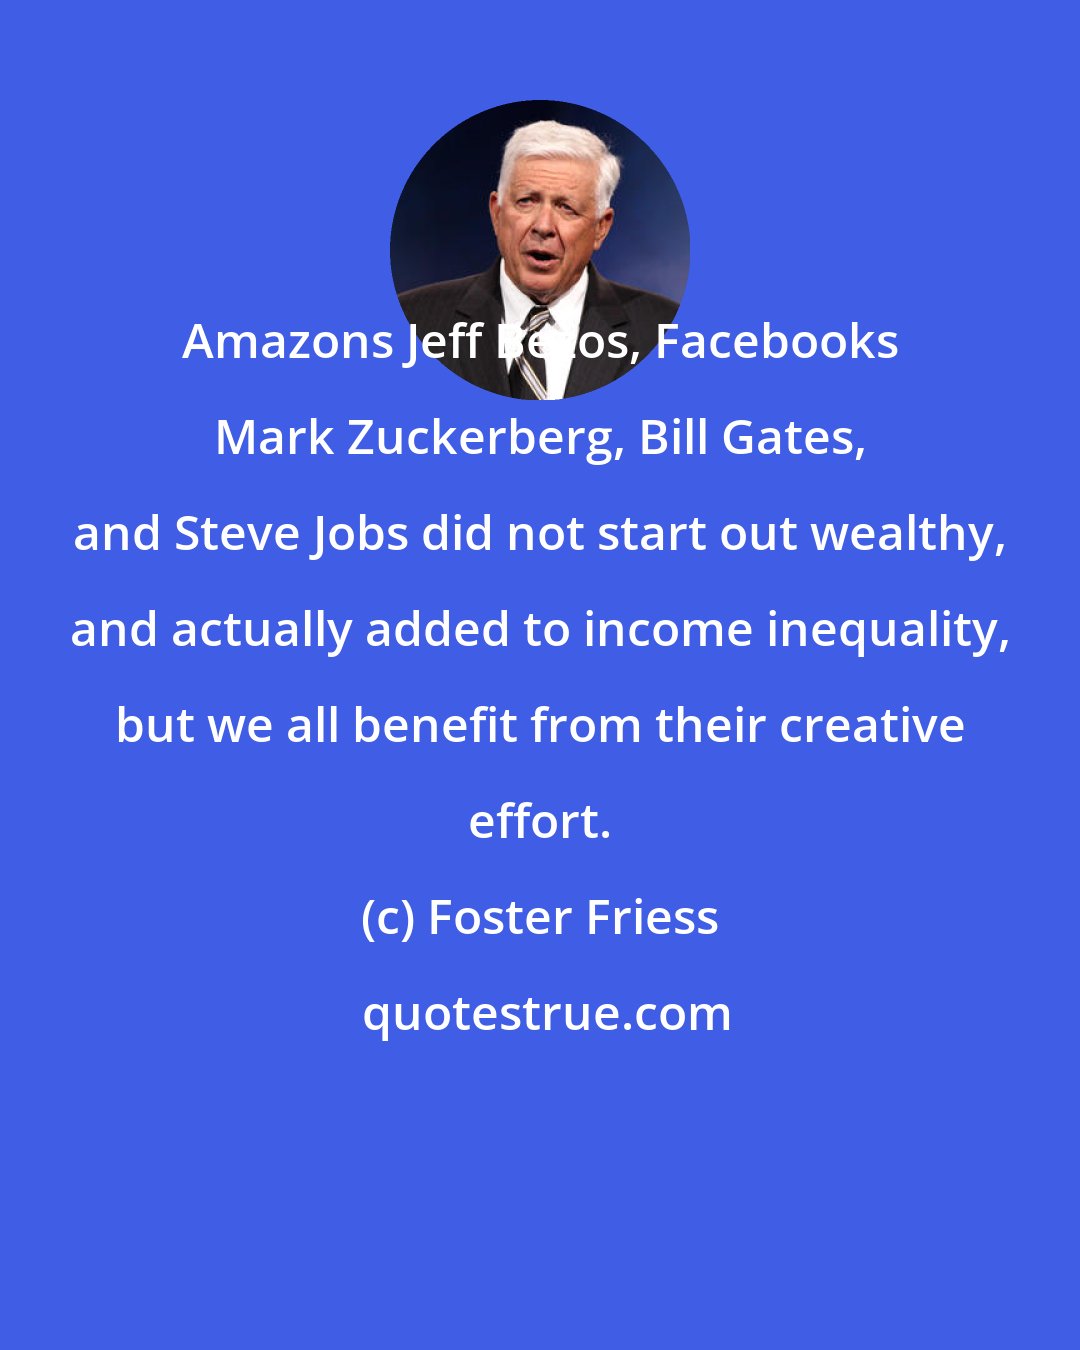 Foster Friess: Amazons Jeff Bezos, Facebooks Mark Zuckerberg, Bill Gates, and Steve Jobs did not start out wealthy, and actually added to income inequality, but we all benefit from their creative effort.